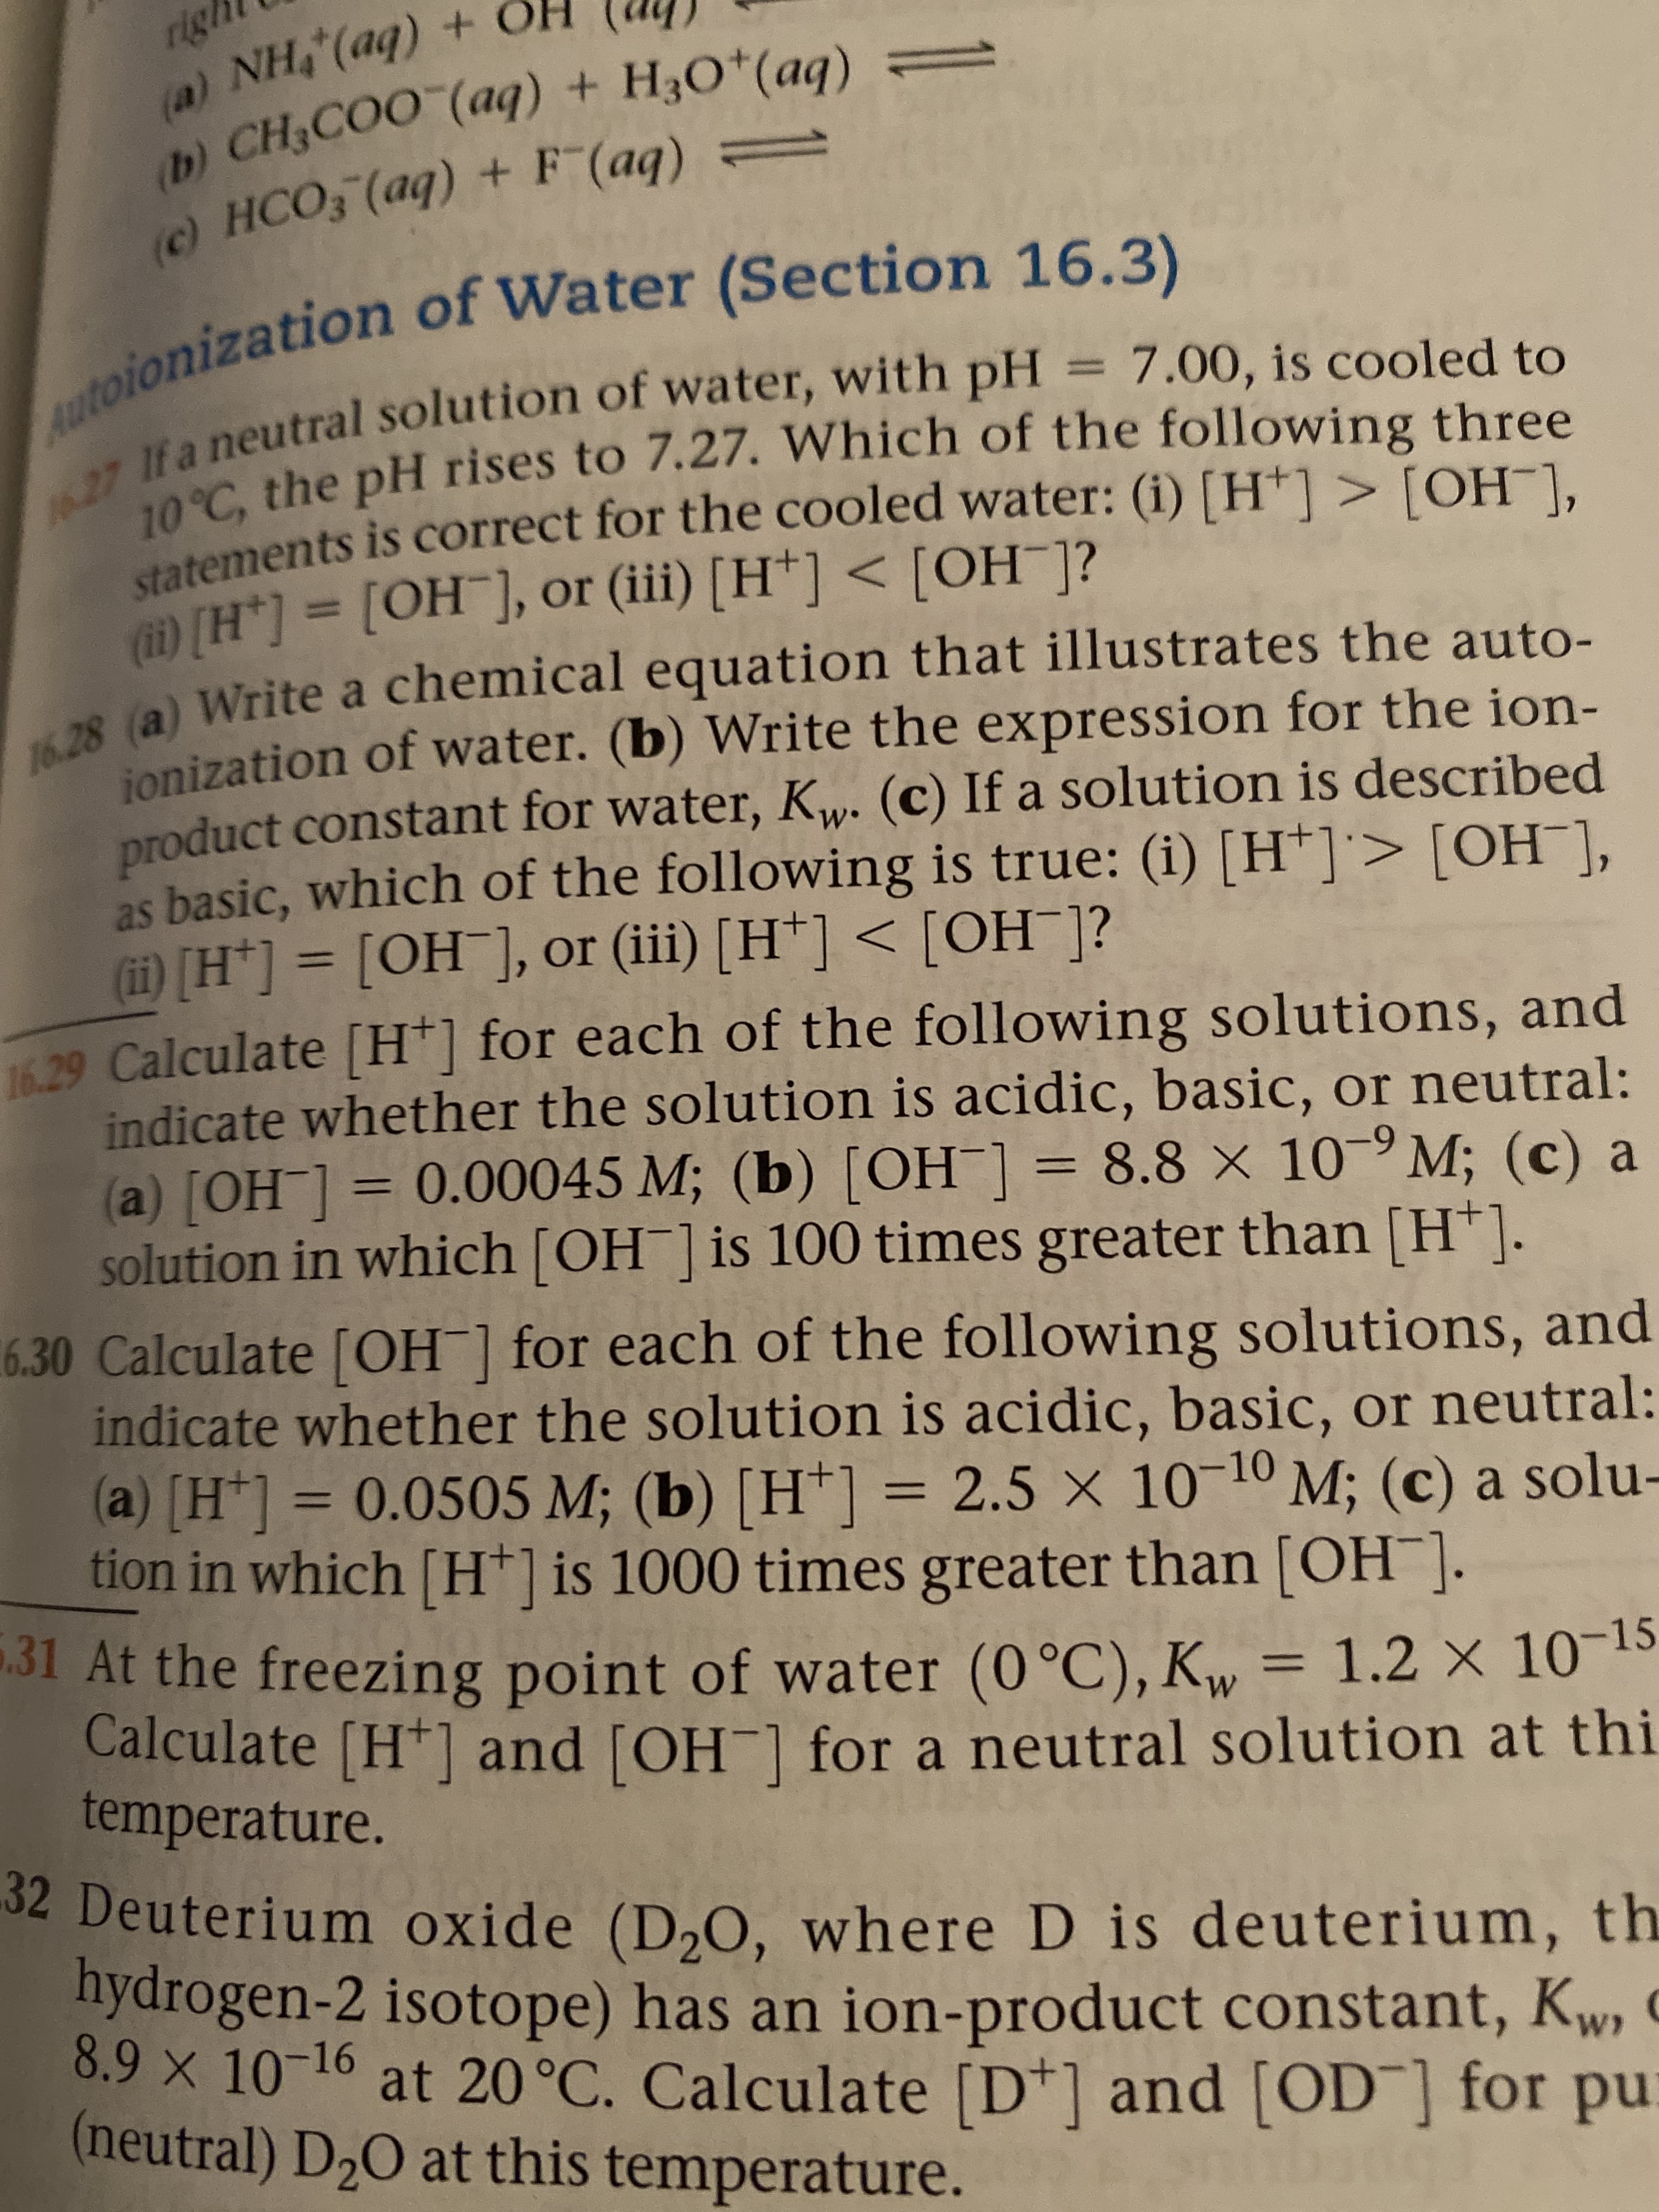 (ii) [H
a) Write a chemical equation that illustrates the auto-
ionization of water. (b) Write the expression for the ion-
product constant for water, Kw. (c) If a solution is described
as basic, which of the following is true: (i) [H*]> [OH¯],
MH*1 = [OH ], or (iii) [H*] < [OH¯]?
%3D
